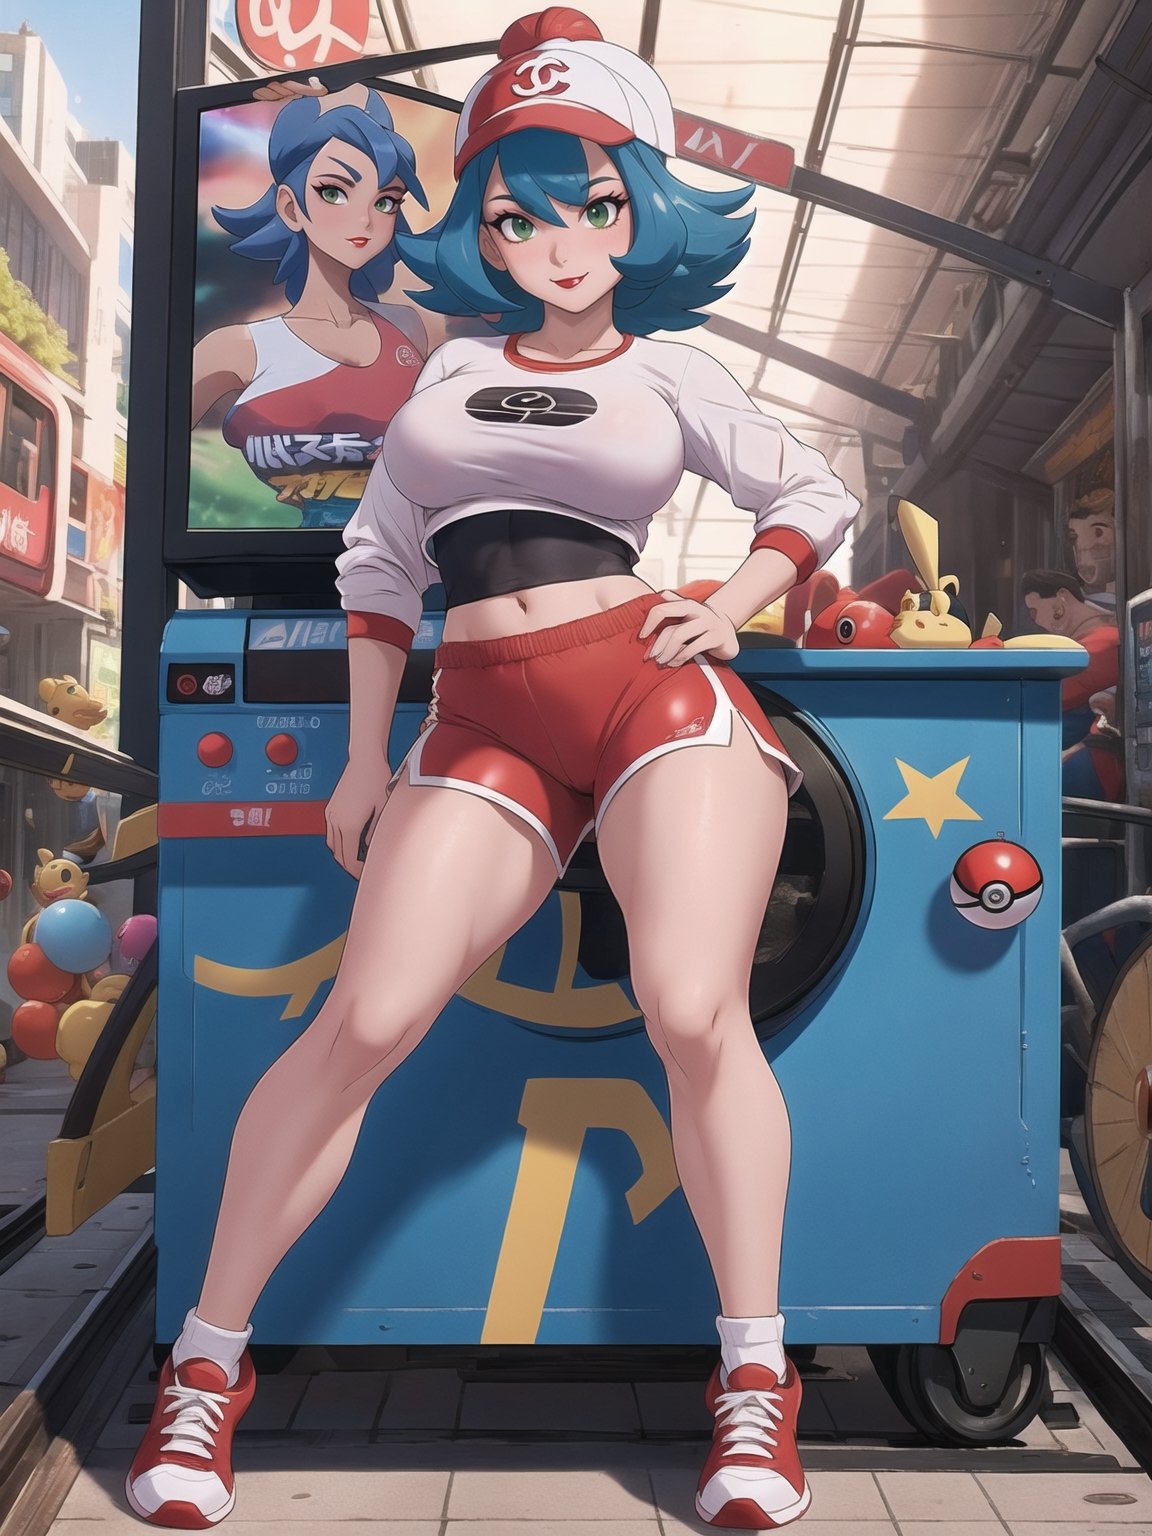 A woman, a Pokémon trainer, is wearing a runner's outfit, a white lycra shirt with red sleeves and a pokéball emblem in the center of the shirt. She is wearing red lycra shorts and white sneakers, and is wearing a runner's helmet on her head. Her breasts are absurdly gigantic. She has short, blue hair in the Chanel style, with a very long fringe covering her left eye. She is looking directly at the viewer. The woman is at a train station with many structures, television advertising panels, and drink machines. Many Pokémon of different types and colors are around her, (a woman is striking a sensual pose, interacting and leaning on any available object/structure in the scene), maximum sharpness, UHD, 16K, anime style, best possible quality, ultra detailed, best possible resolution, ((full body)), Unreal Engine 5, professional photography, perfect_thighs, perfect_legs, perfect_feet, perfect hand, fingers, hand, perfect, better_hands, (pokémon), more detail